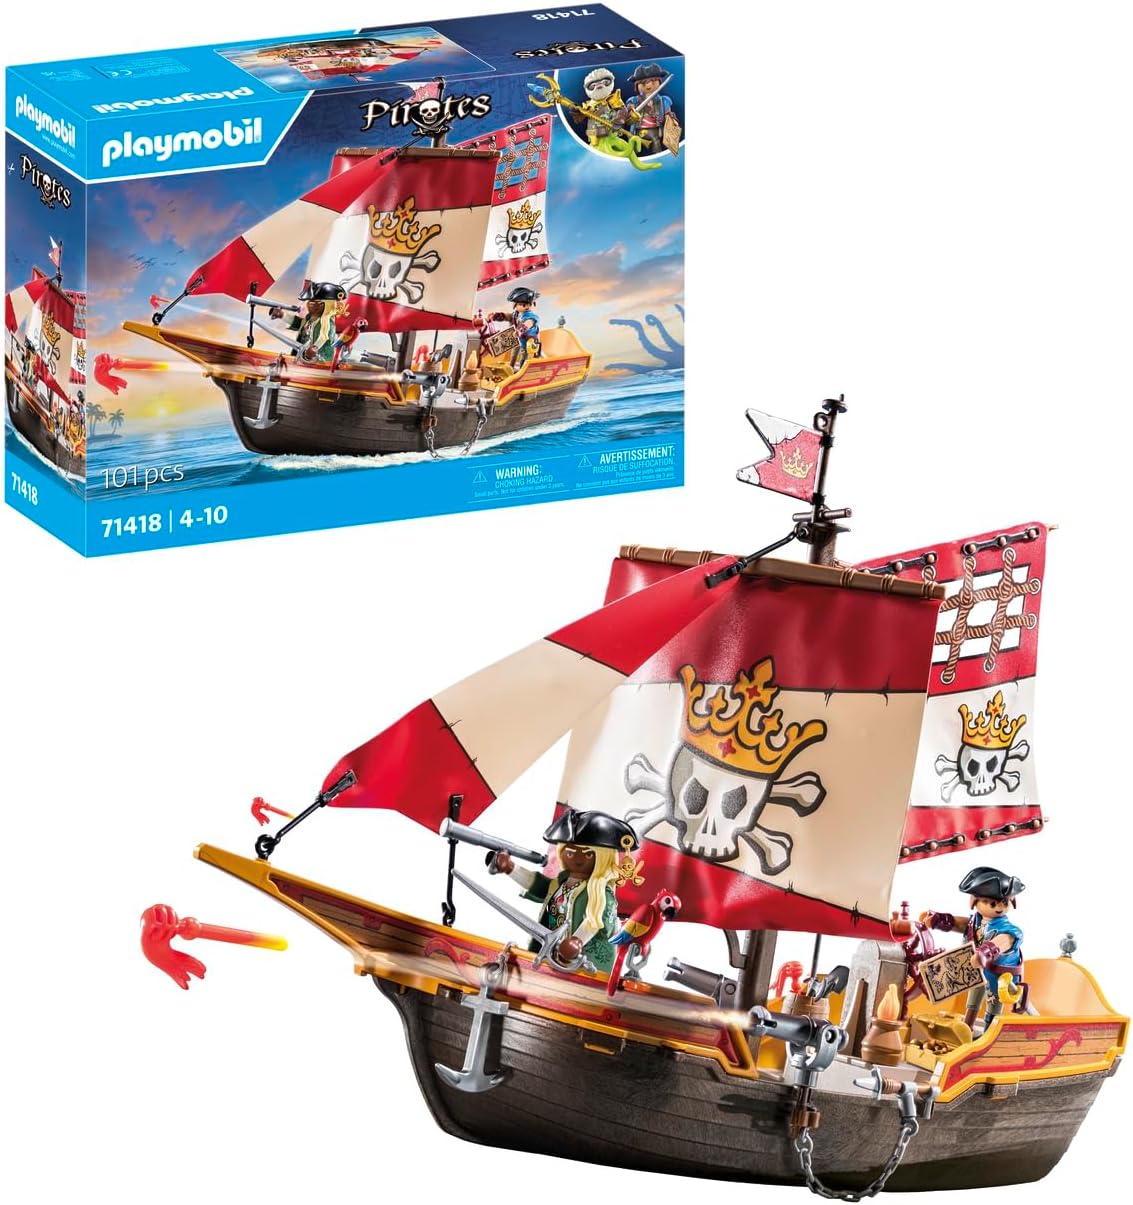 PLAYMOBIL Pirates 71418 Pirate Ship, Exciting Adventures on the High Sea, with Extensive Accessories such as Telescope, Compass and Cannons, Toy for Children from 4 Years